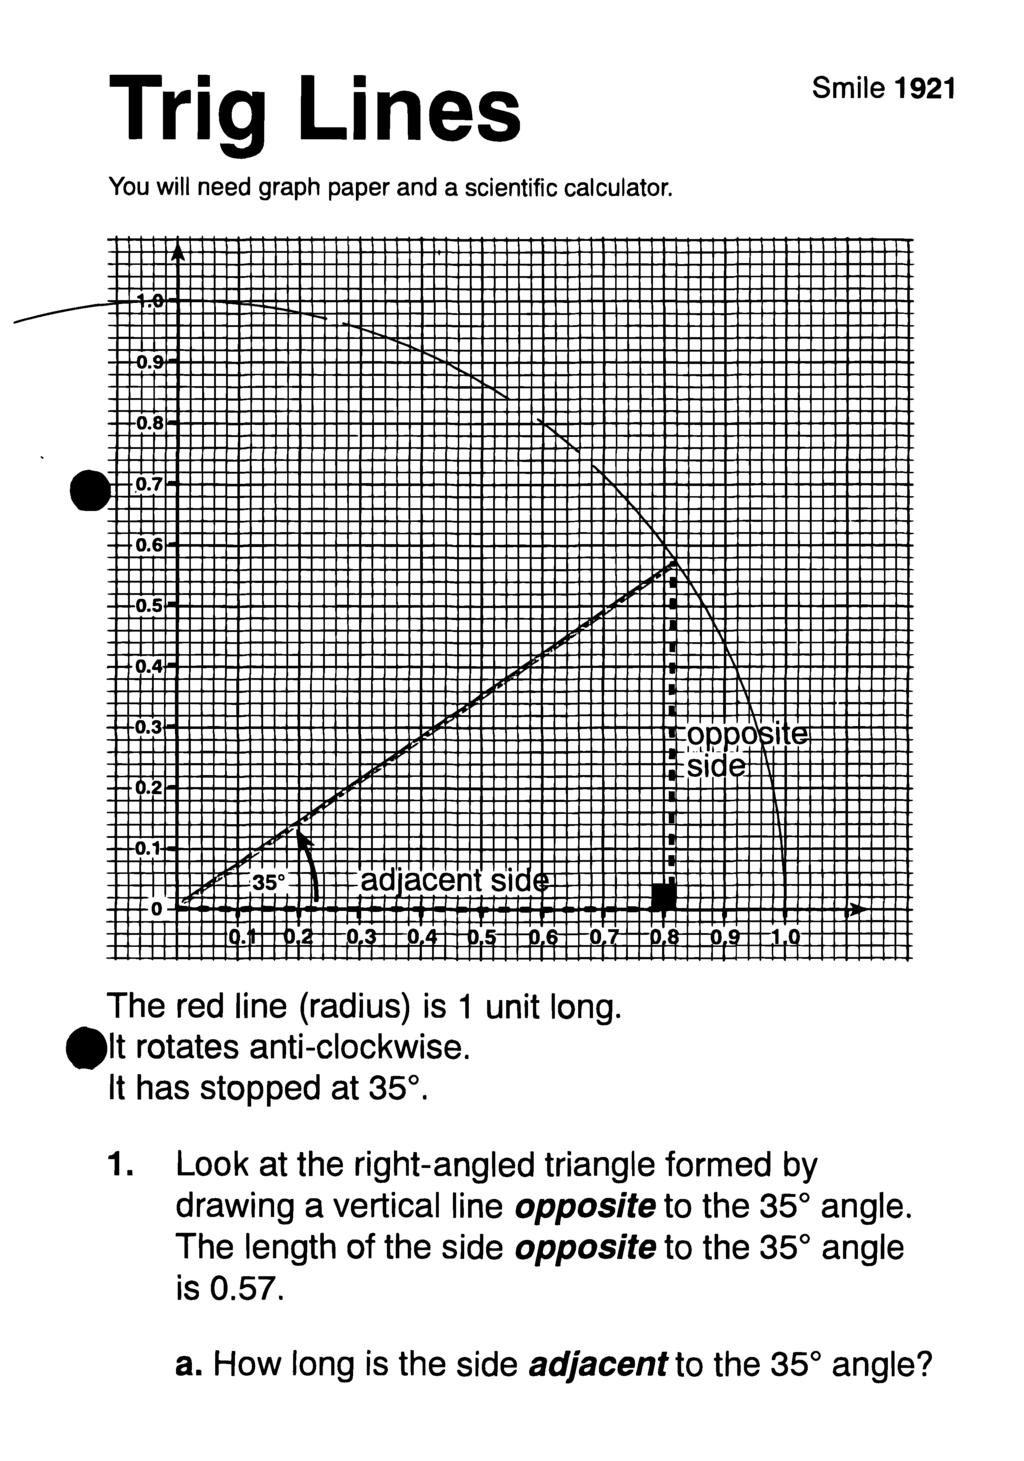 Trig Lines Smile 92 You will need graph paper and a scientific calculator..9 ---.8.7 --.6.5 >.4 *'- ---.3 --.2 opdasi side I _.i. ll I L ^35 ad acent side^ The red line (radius) is )lt rotates anti-clockwise.